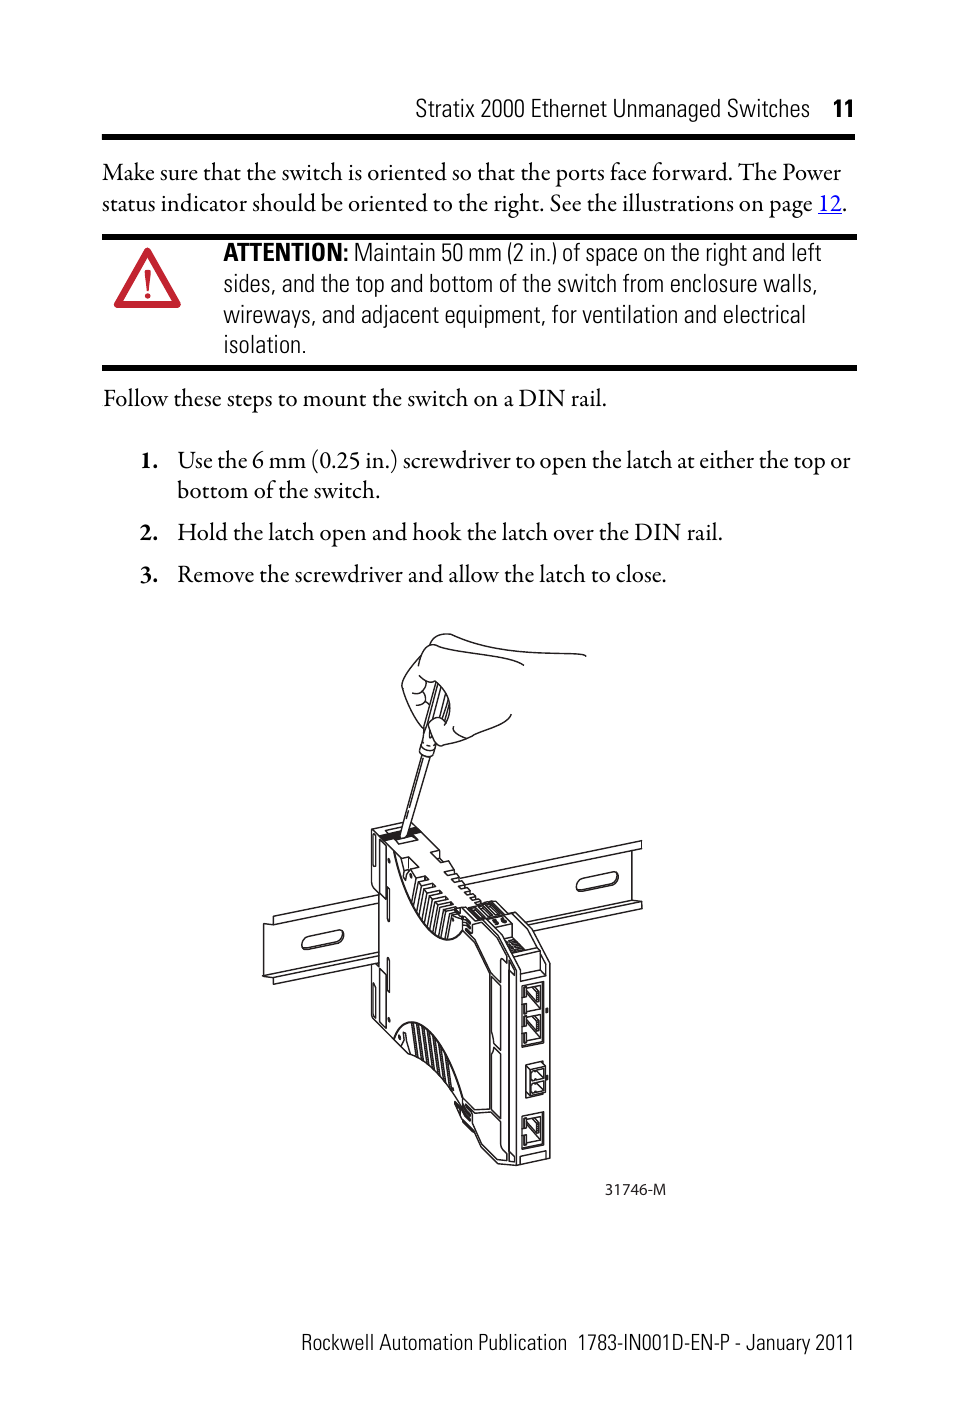 Rockwell Automation 1783-US08T Stratix 2000 Ethernet Unmanaged Switch Installation Instructions User Manual | Page 11 / 28